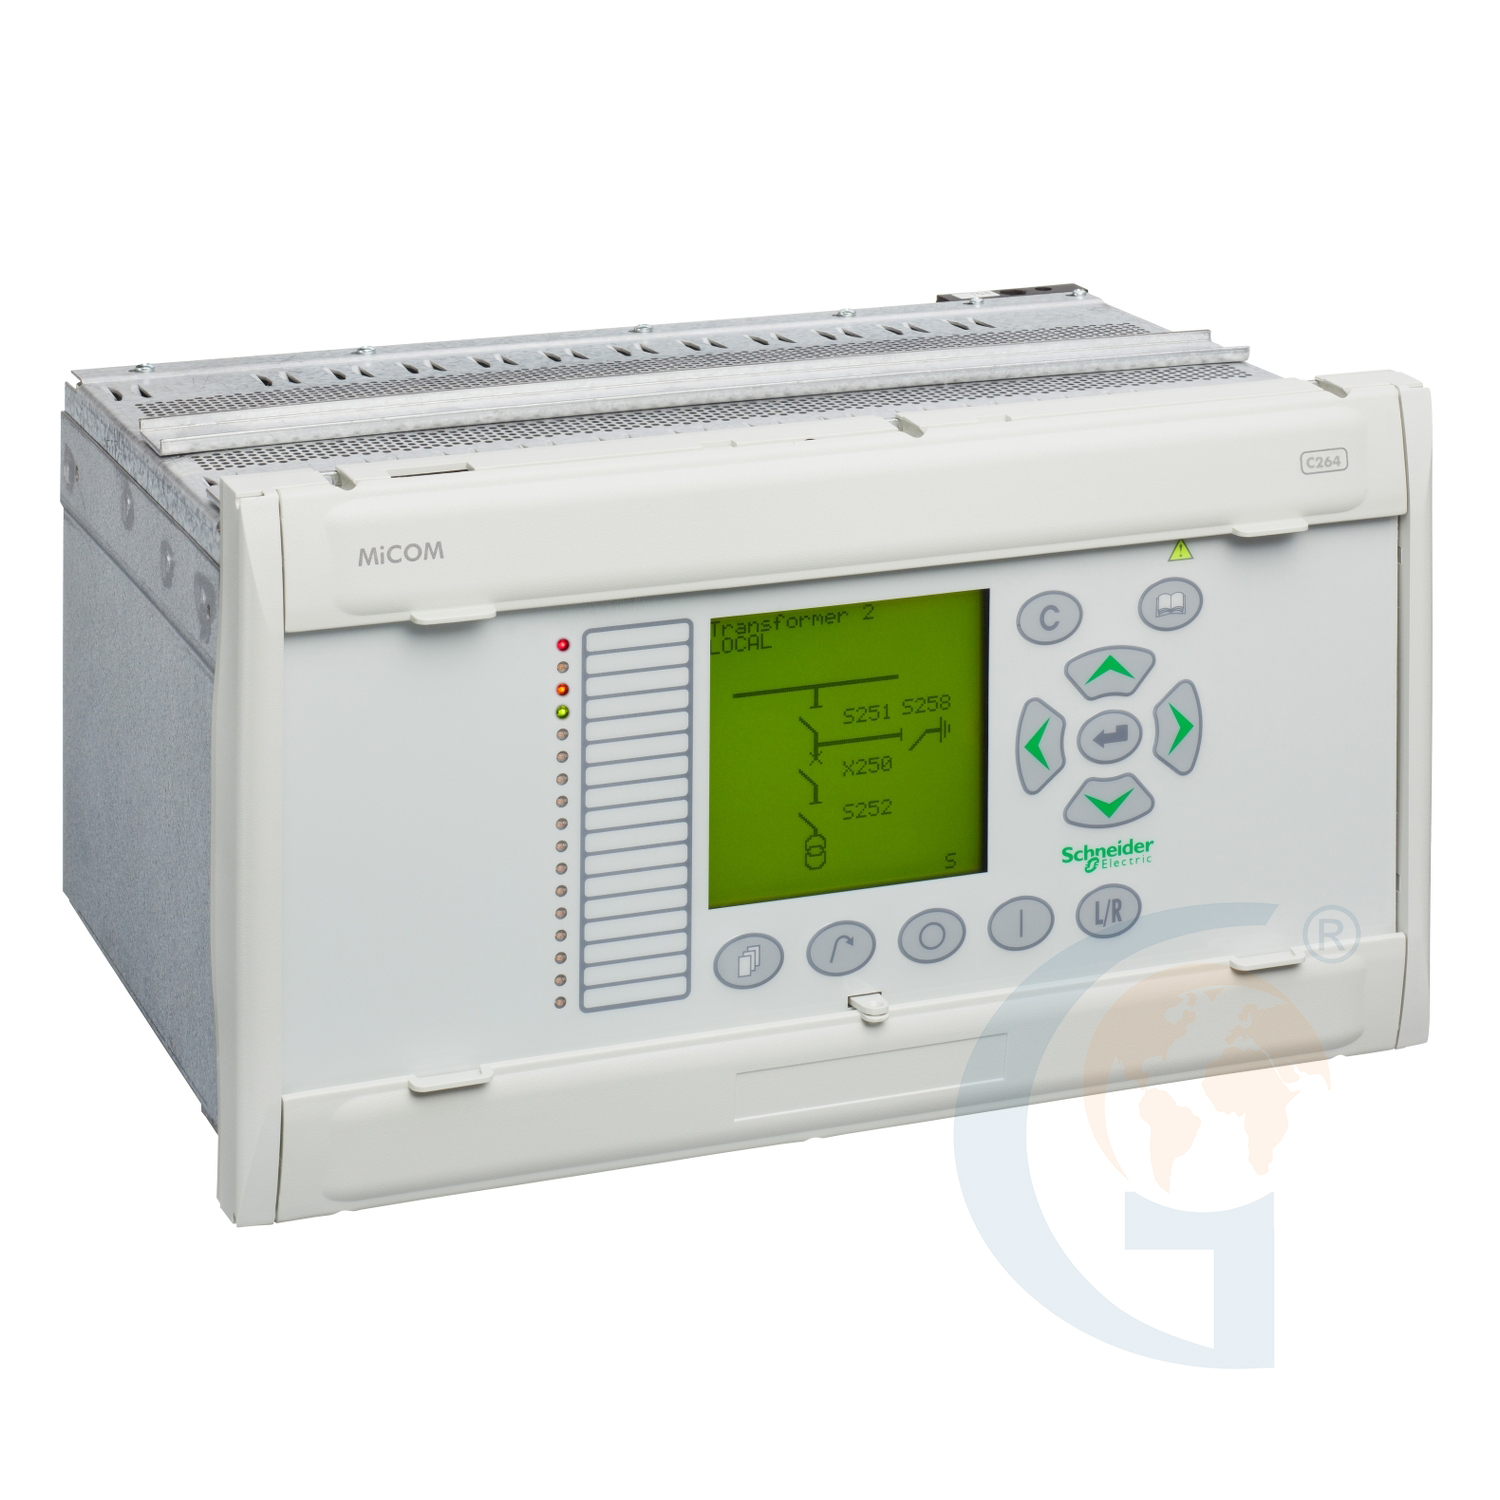 Schneider Electric C264T0-------0---- MICOM C264 BAY CONTROLLER AND RTU WITH LED INDICATION 60TE SIZE https://gesrepair.com/wp-content/uploads/2020/Schneider/Schneider_Electric_C264T0-------0----_.jpg